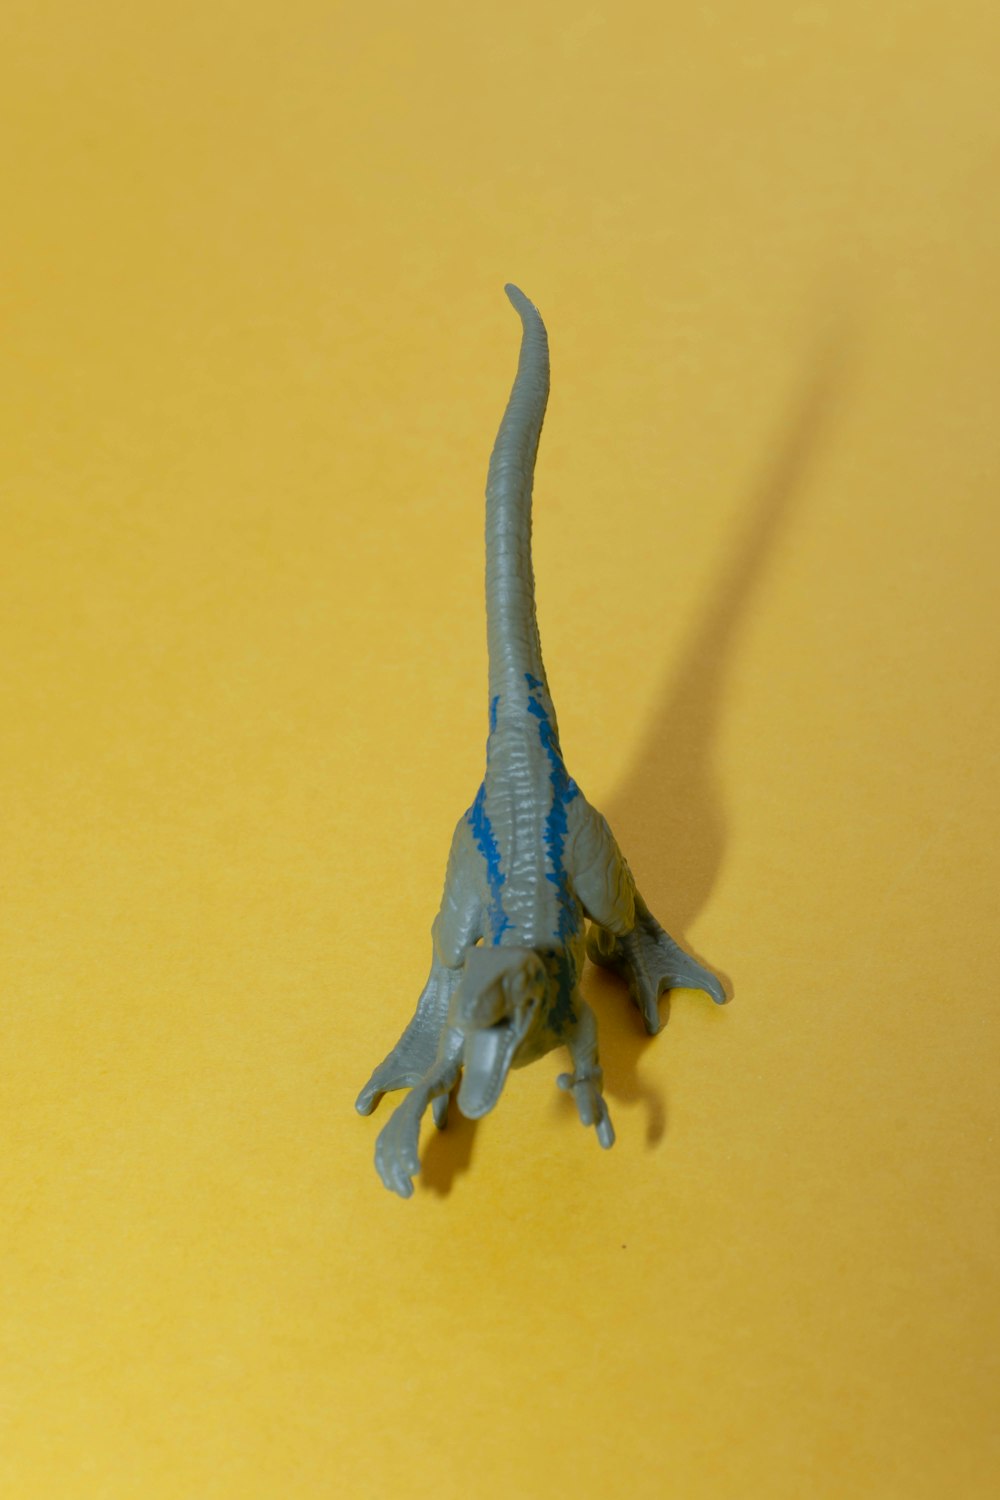 a toy dinosaur on a yellow surface